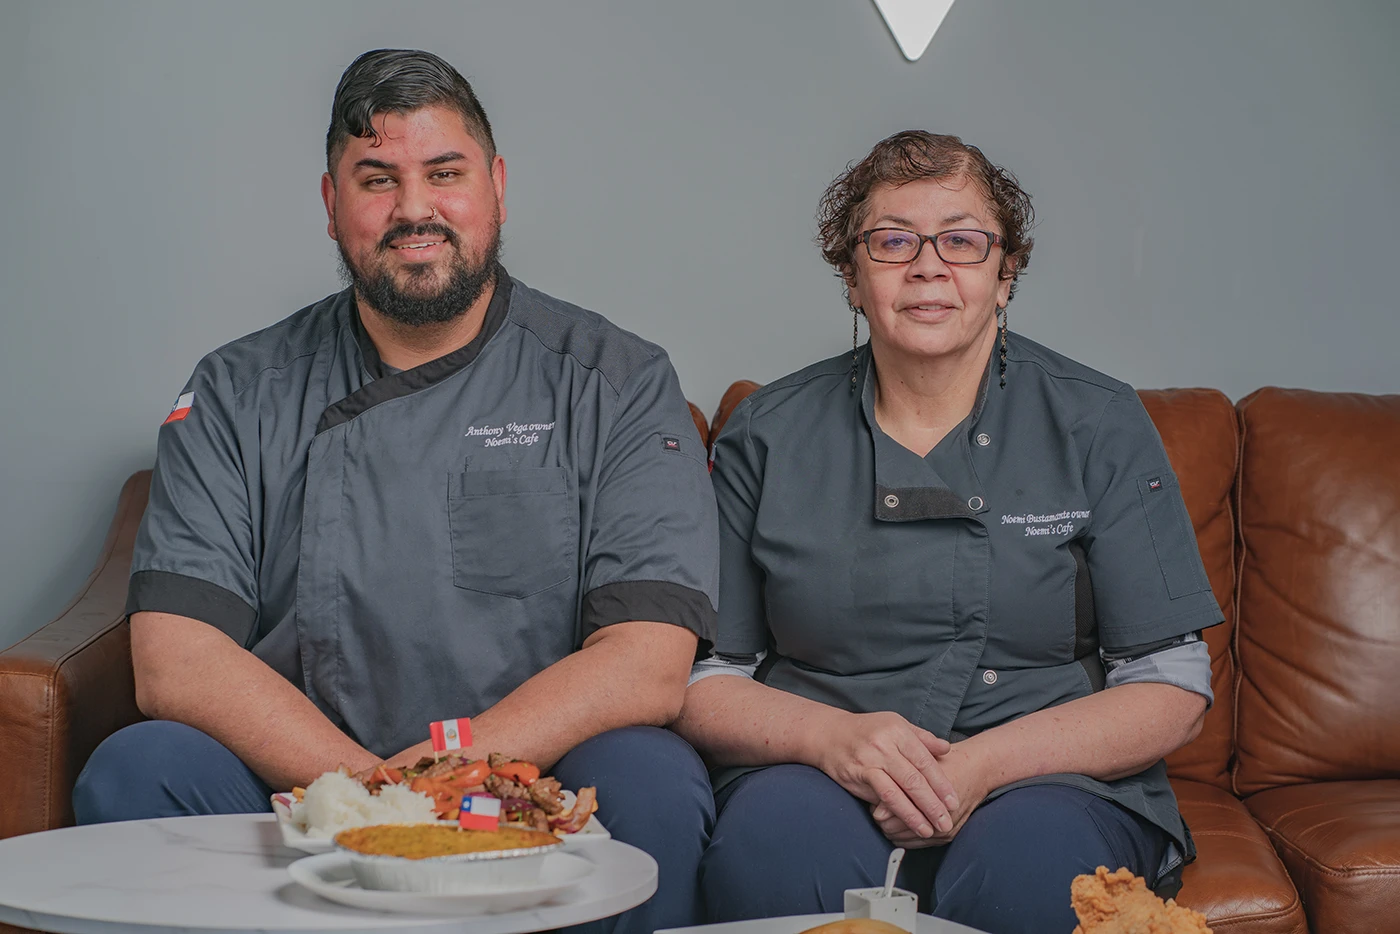 Noemi’s staff (L–R Anthony Vega and Noemi Bustamante) have a kind, gentle energy. Everyone seems to help in all facets of the restaurant, from cooking and food running to working the register.